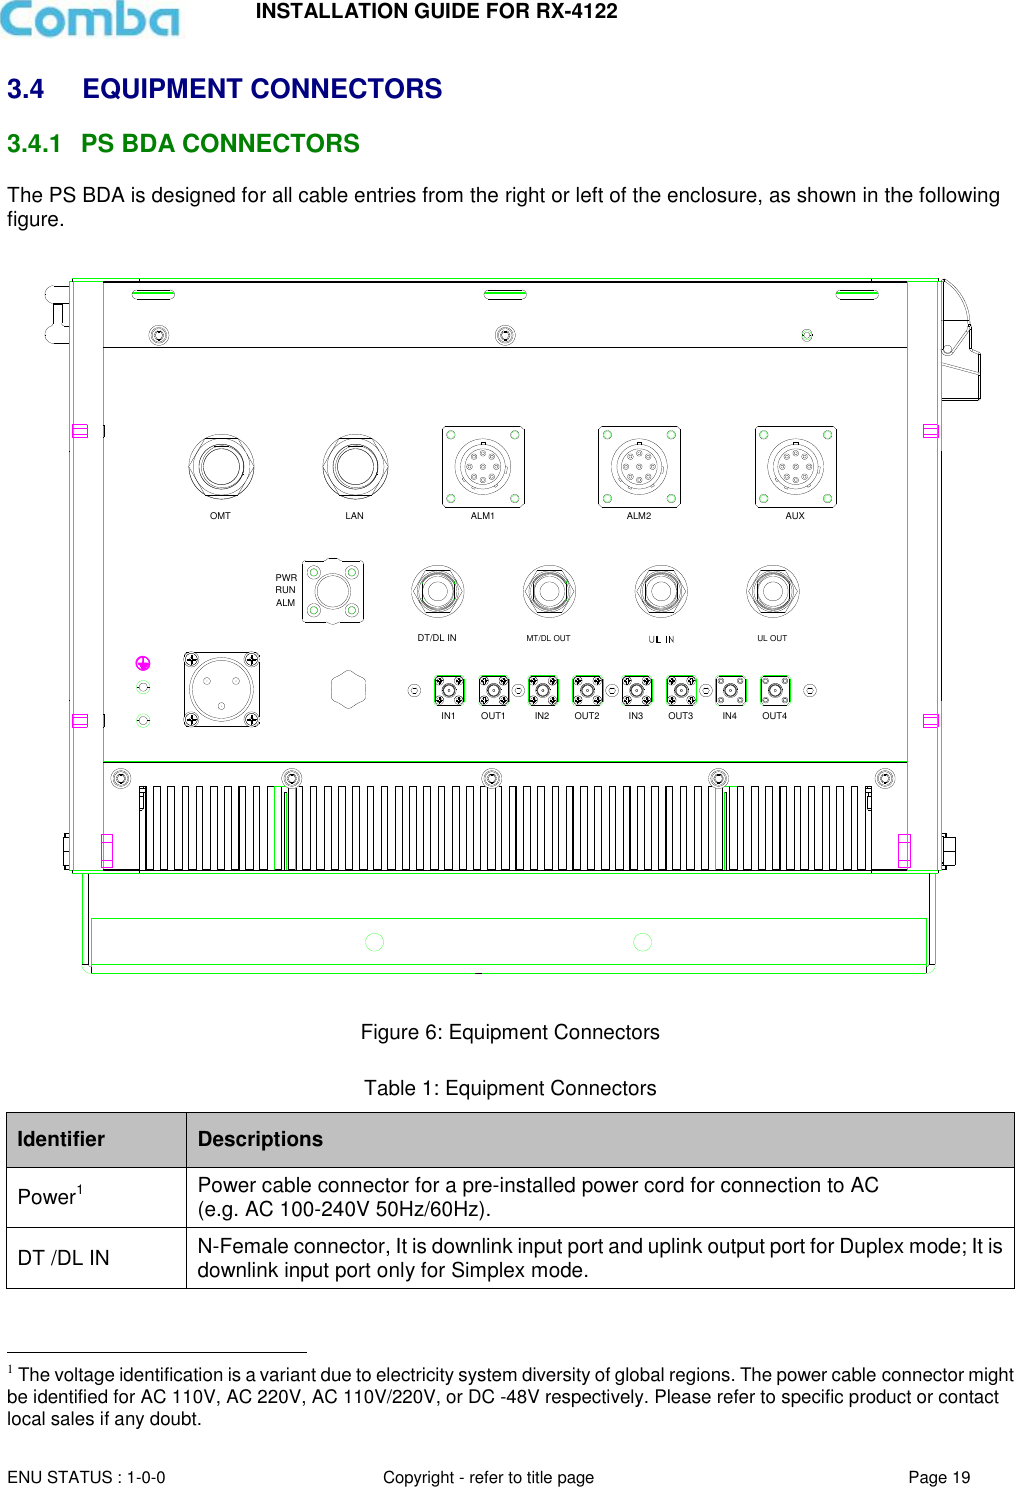 INSTALLATION GUIDE FOR RX-4122  ENU STATUS : 1-0-0 Copyright - refer to title page Page 19     3.4  EQUIPMENT CONNECTORS 3.4.1  PS BDA CONNECTORS The PS BDA is designed for all cable entries from the right or left of the enclosure, as shown in the following figure.   OMT LAN ALM1 ALM2 AUXRUNPWRALMDT/DL IN MT/DL OUT UL OUTIN1 OUT1 IN2 OUT2 IN3 OUT3 IN4 OUT4  Figure 6: Equipment Connectors  Table 1: Equipment Connectors Identifier Descriptions Power1 Power cable connector for a pre-installed power cord for connection to AC (e.g. AC 100-240V 50Hz/60Hz). DT /DL IN N-Female connector, It is downlink input port and uplink output port for Duplex mode; It is downlink input port only for Simplex mode.                                                  1 The voltage identification is a variant due to electricity system diversity of global regions. The power cable connector might be identified for AC 110V, AC 220V, AC 110V/220V, or DC -48V respectively. Please refer to specific product or contact local sales if any doubt. 